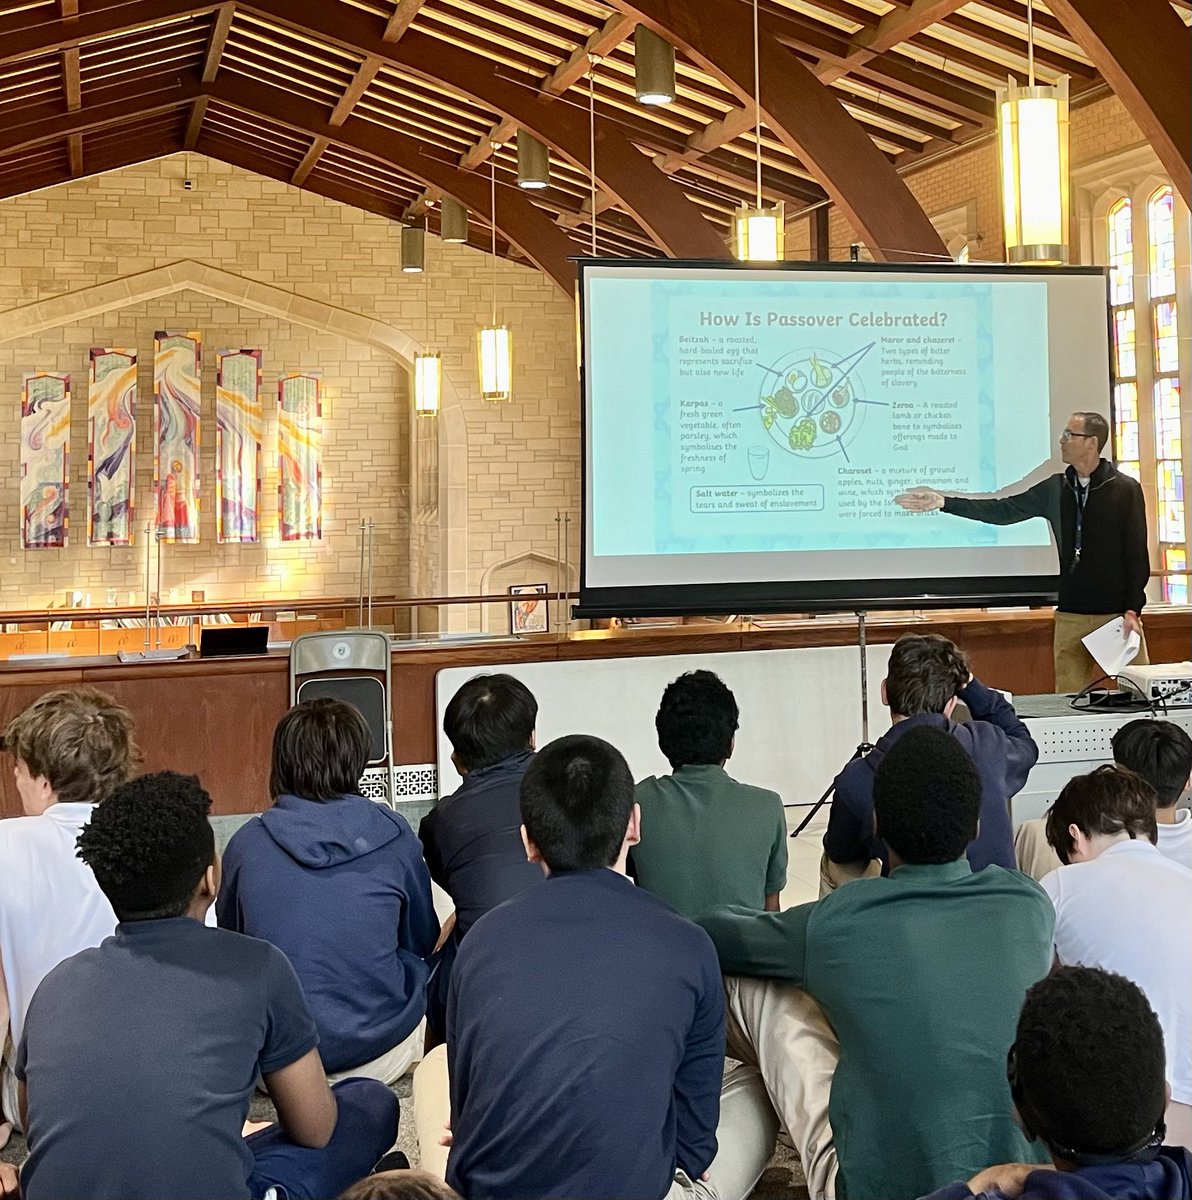 Thank you to Mr. Sadowsky for sharing the traditions of #Passover with our Middle School today @PrincetonAcadSH - Wishing a joyous, peaceful, and blessed Passover to all who are celebrating.